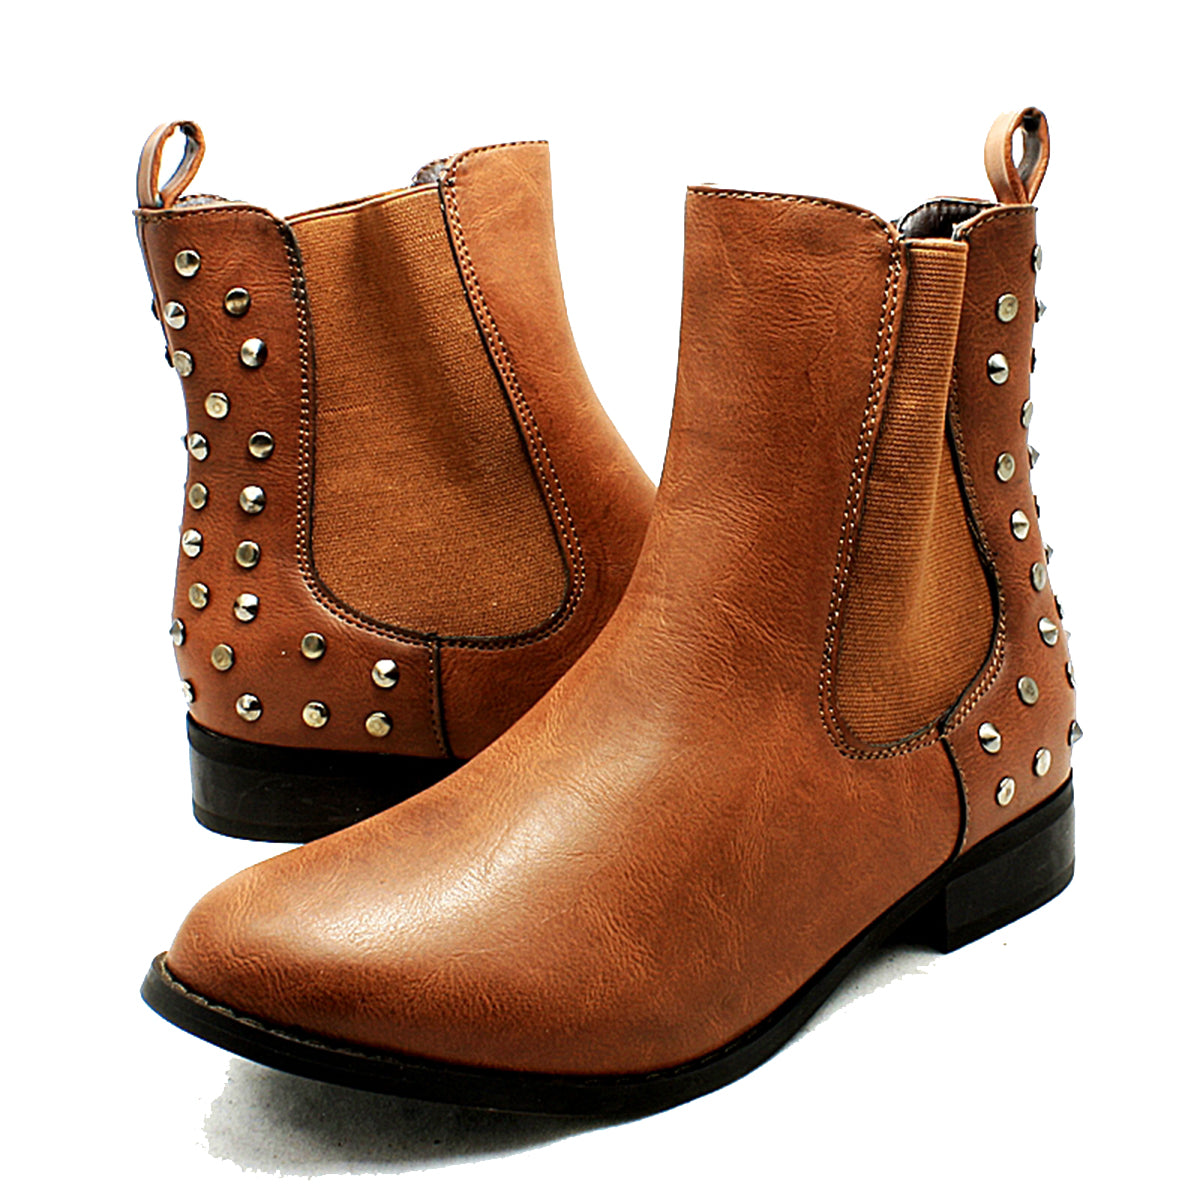 Flat ankle Boots with elasticated sides